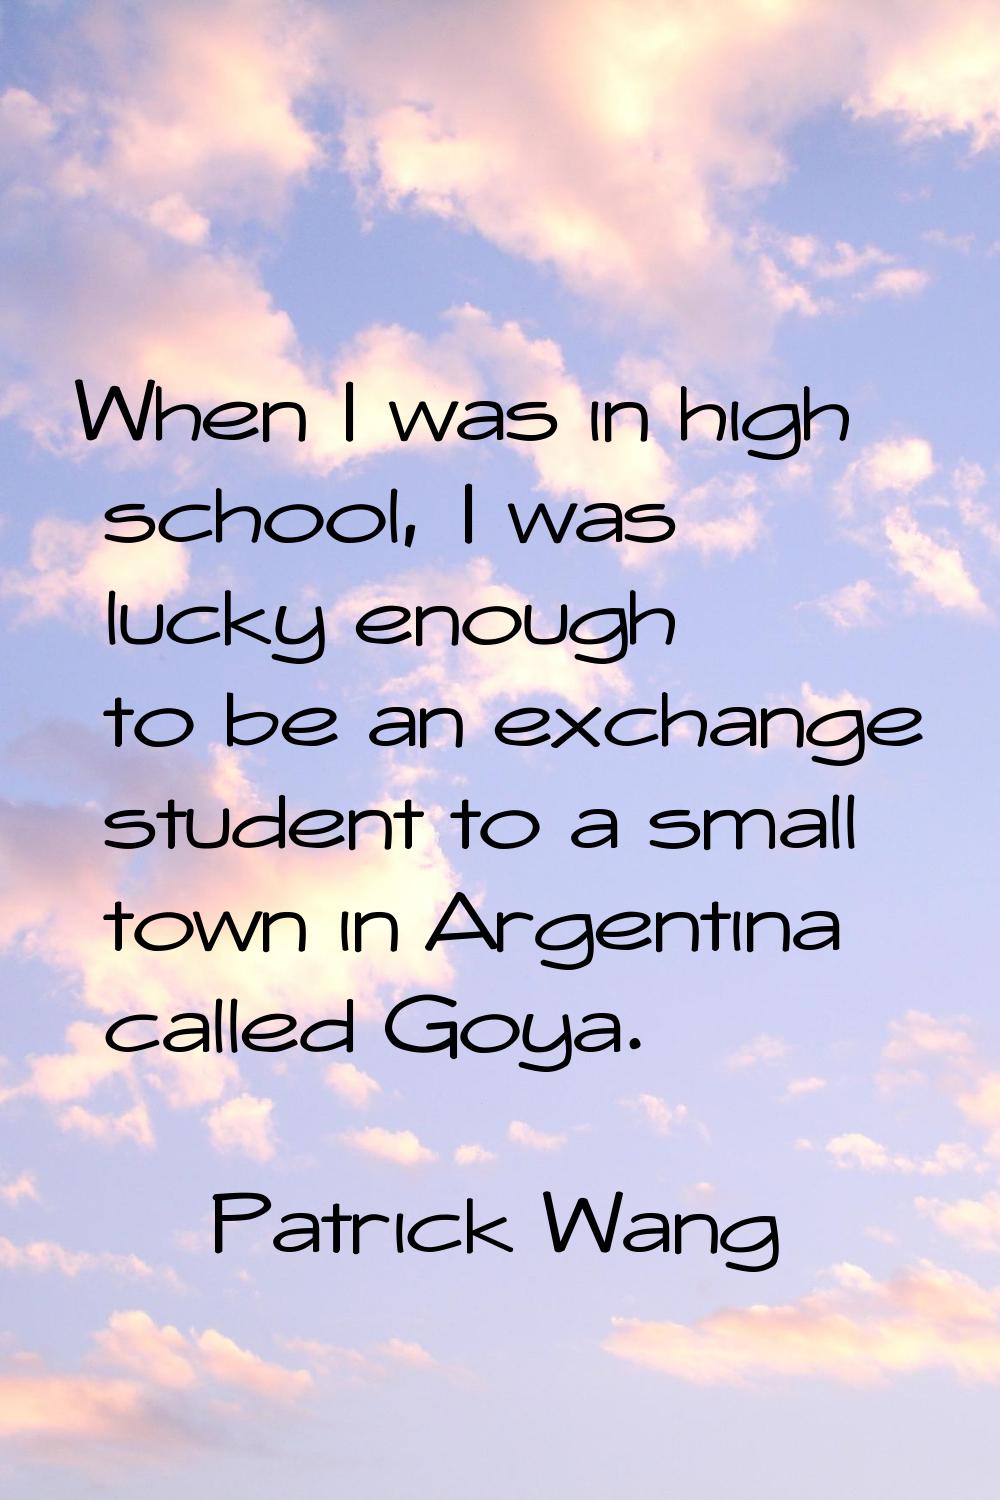 When I was in high school, I was lucky enough to be an exchange student to a small town in Argentin